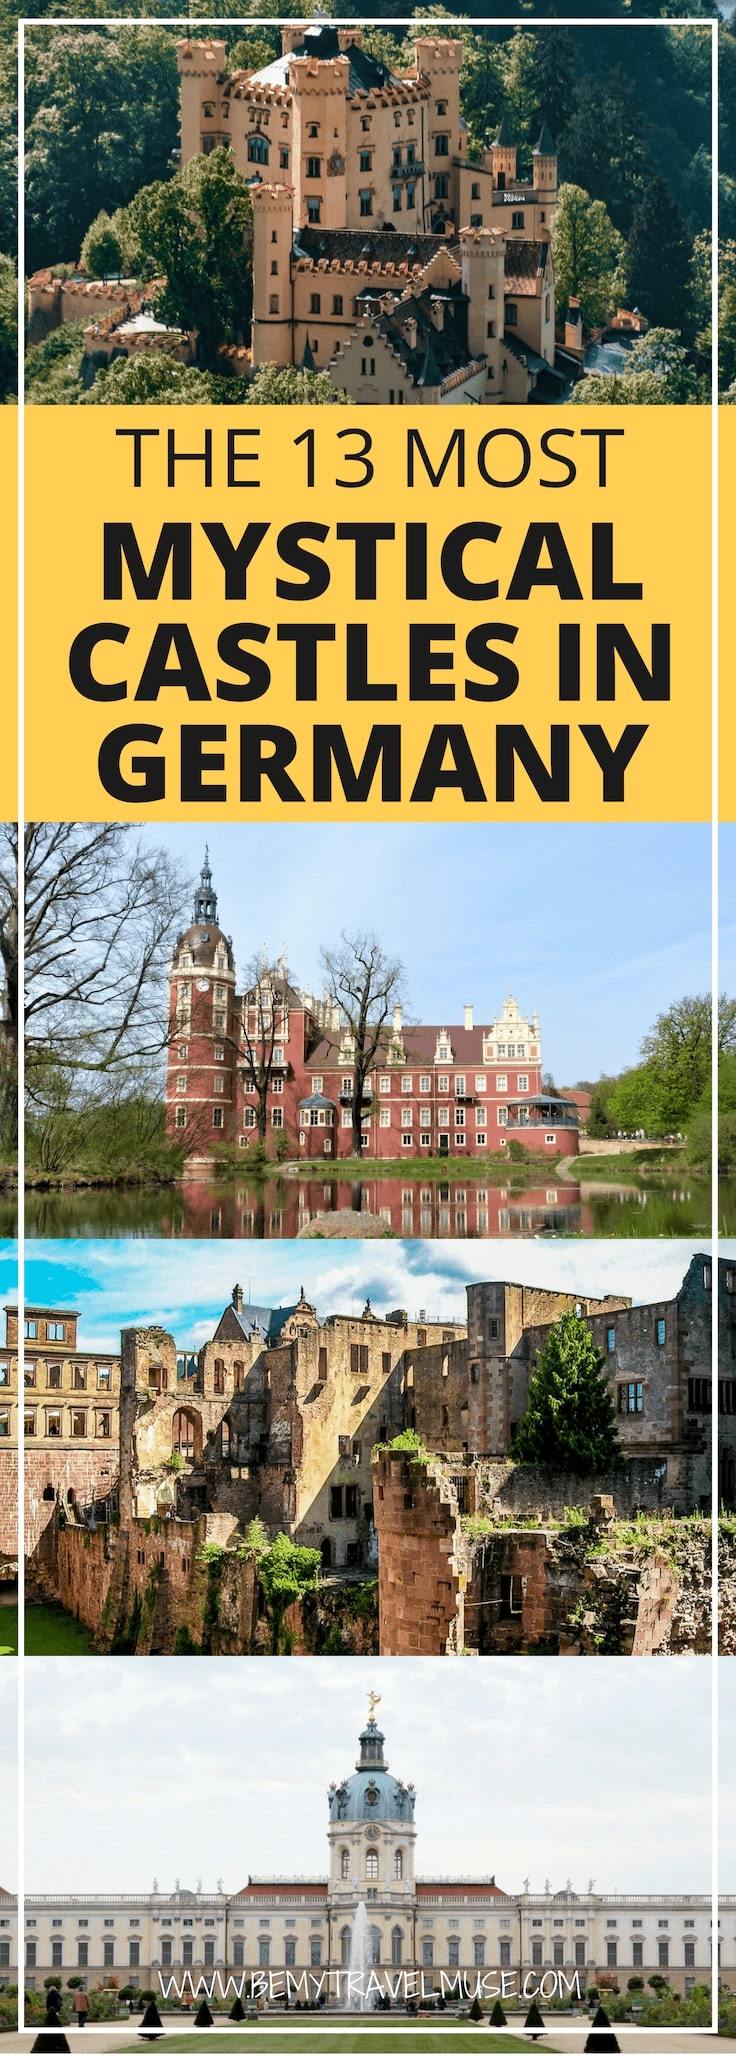 If you like mystical castles, you need to visit Germany! I rounded up 13 of the most beautiful castles in Germany that will help you plan your dream trip. From the popular Hohenzollern to some lesser known ones, pictures and what makes each of them so special included. #Germany #Castles